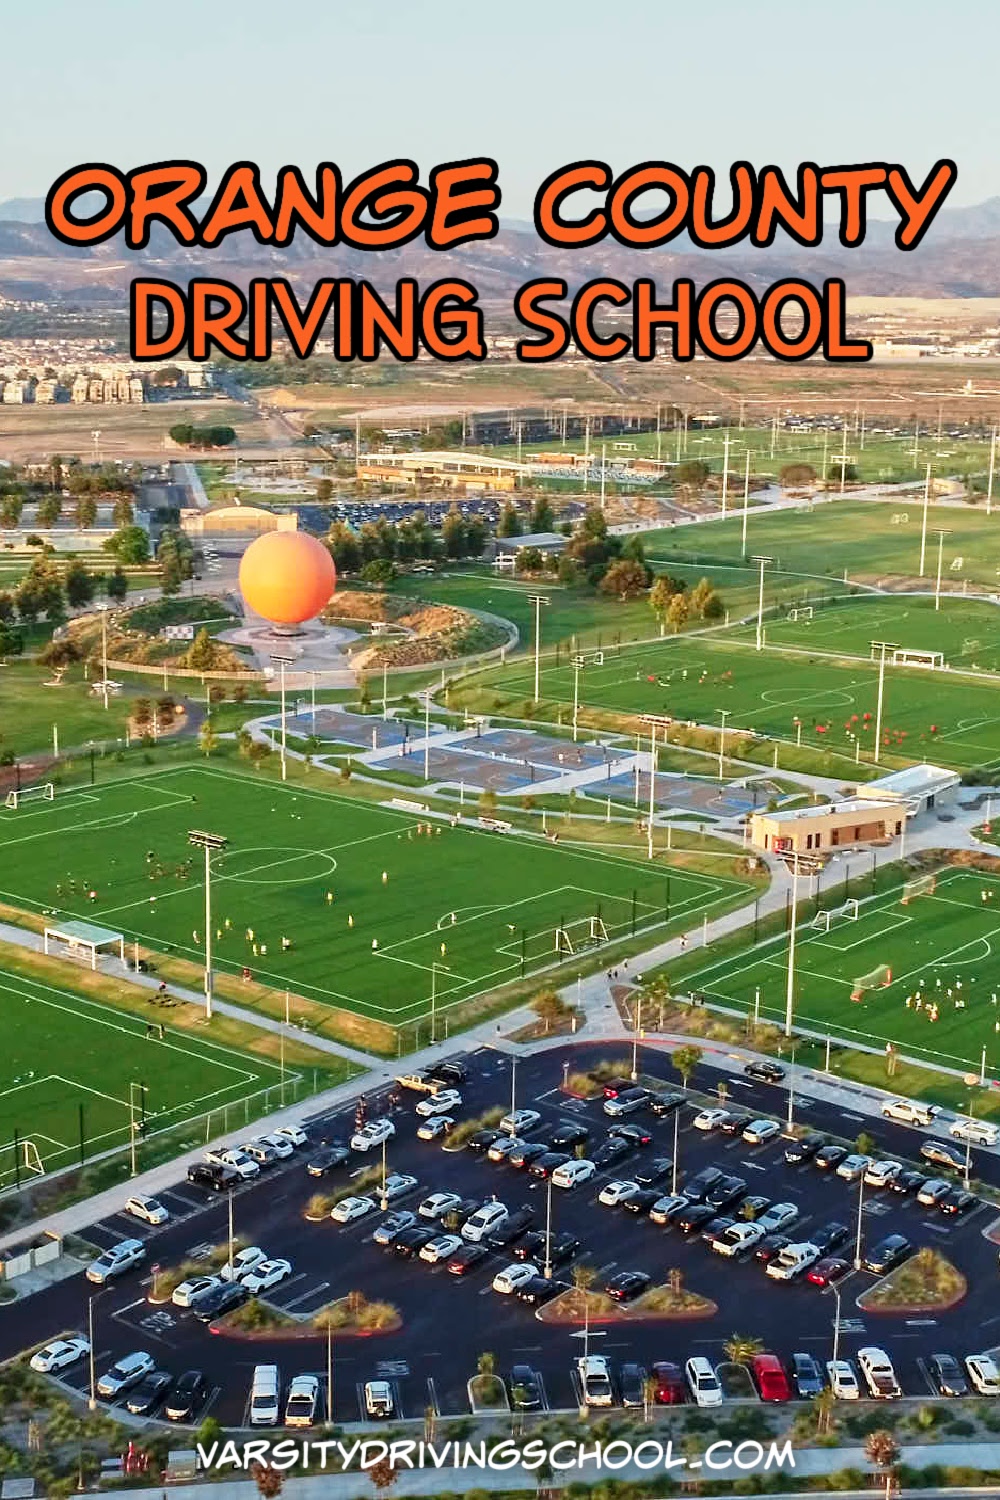 The best Orange County driving school is Varsity Driving School, where students get the best driver education and behind the wheel training.